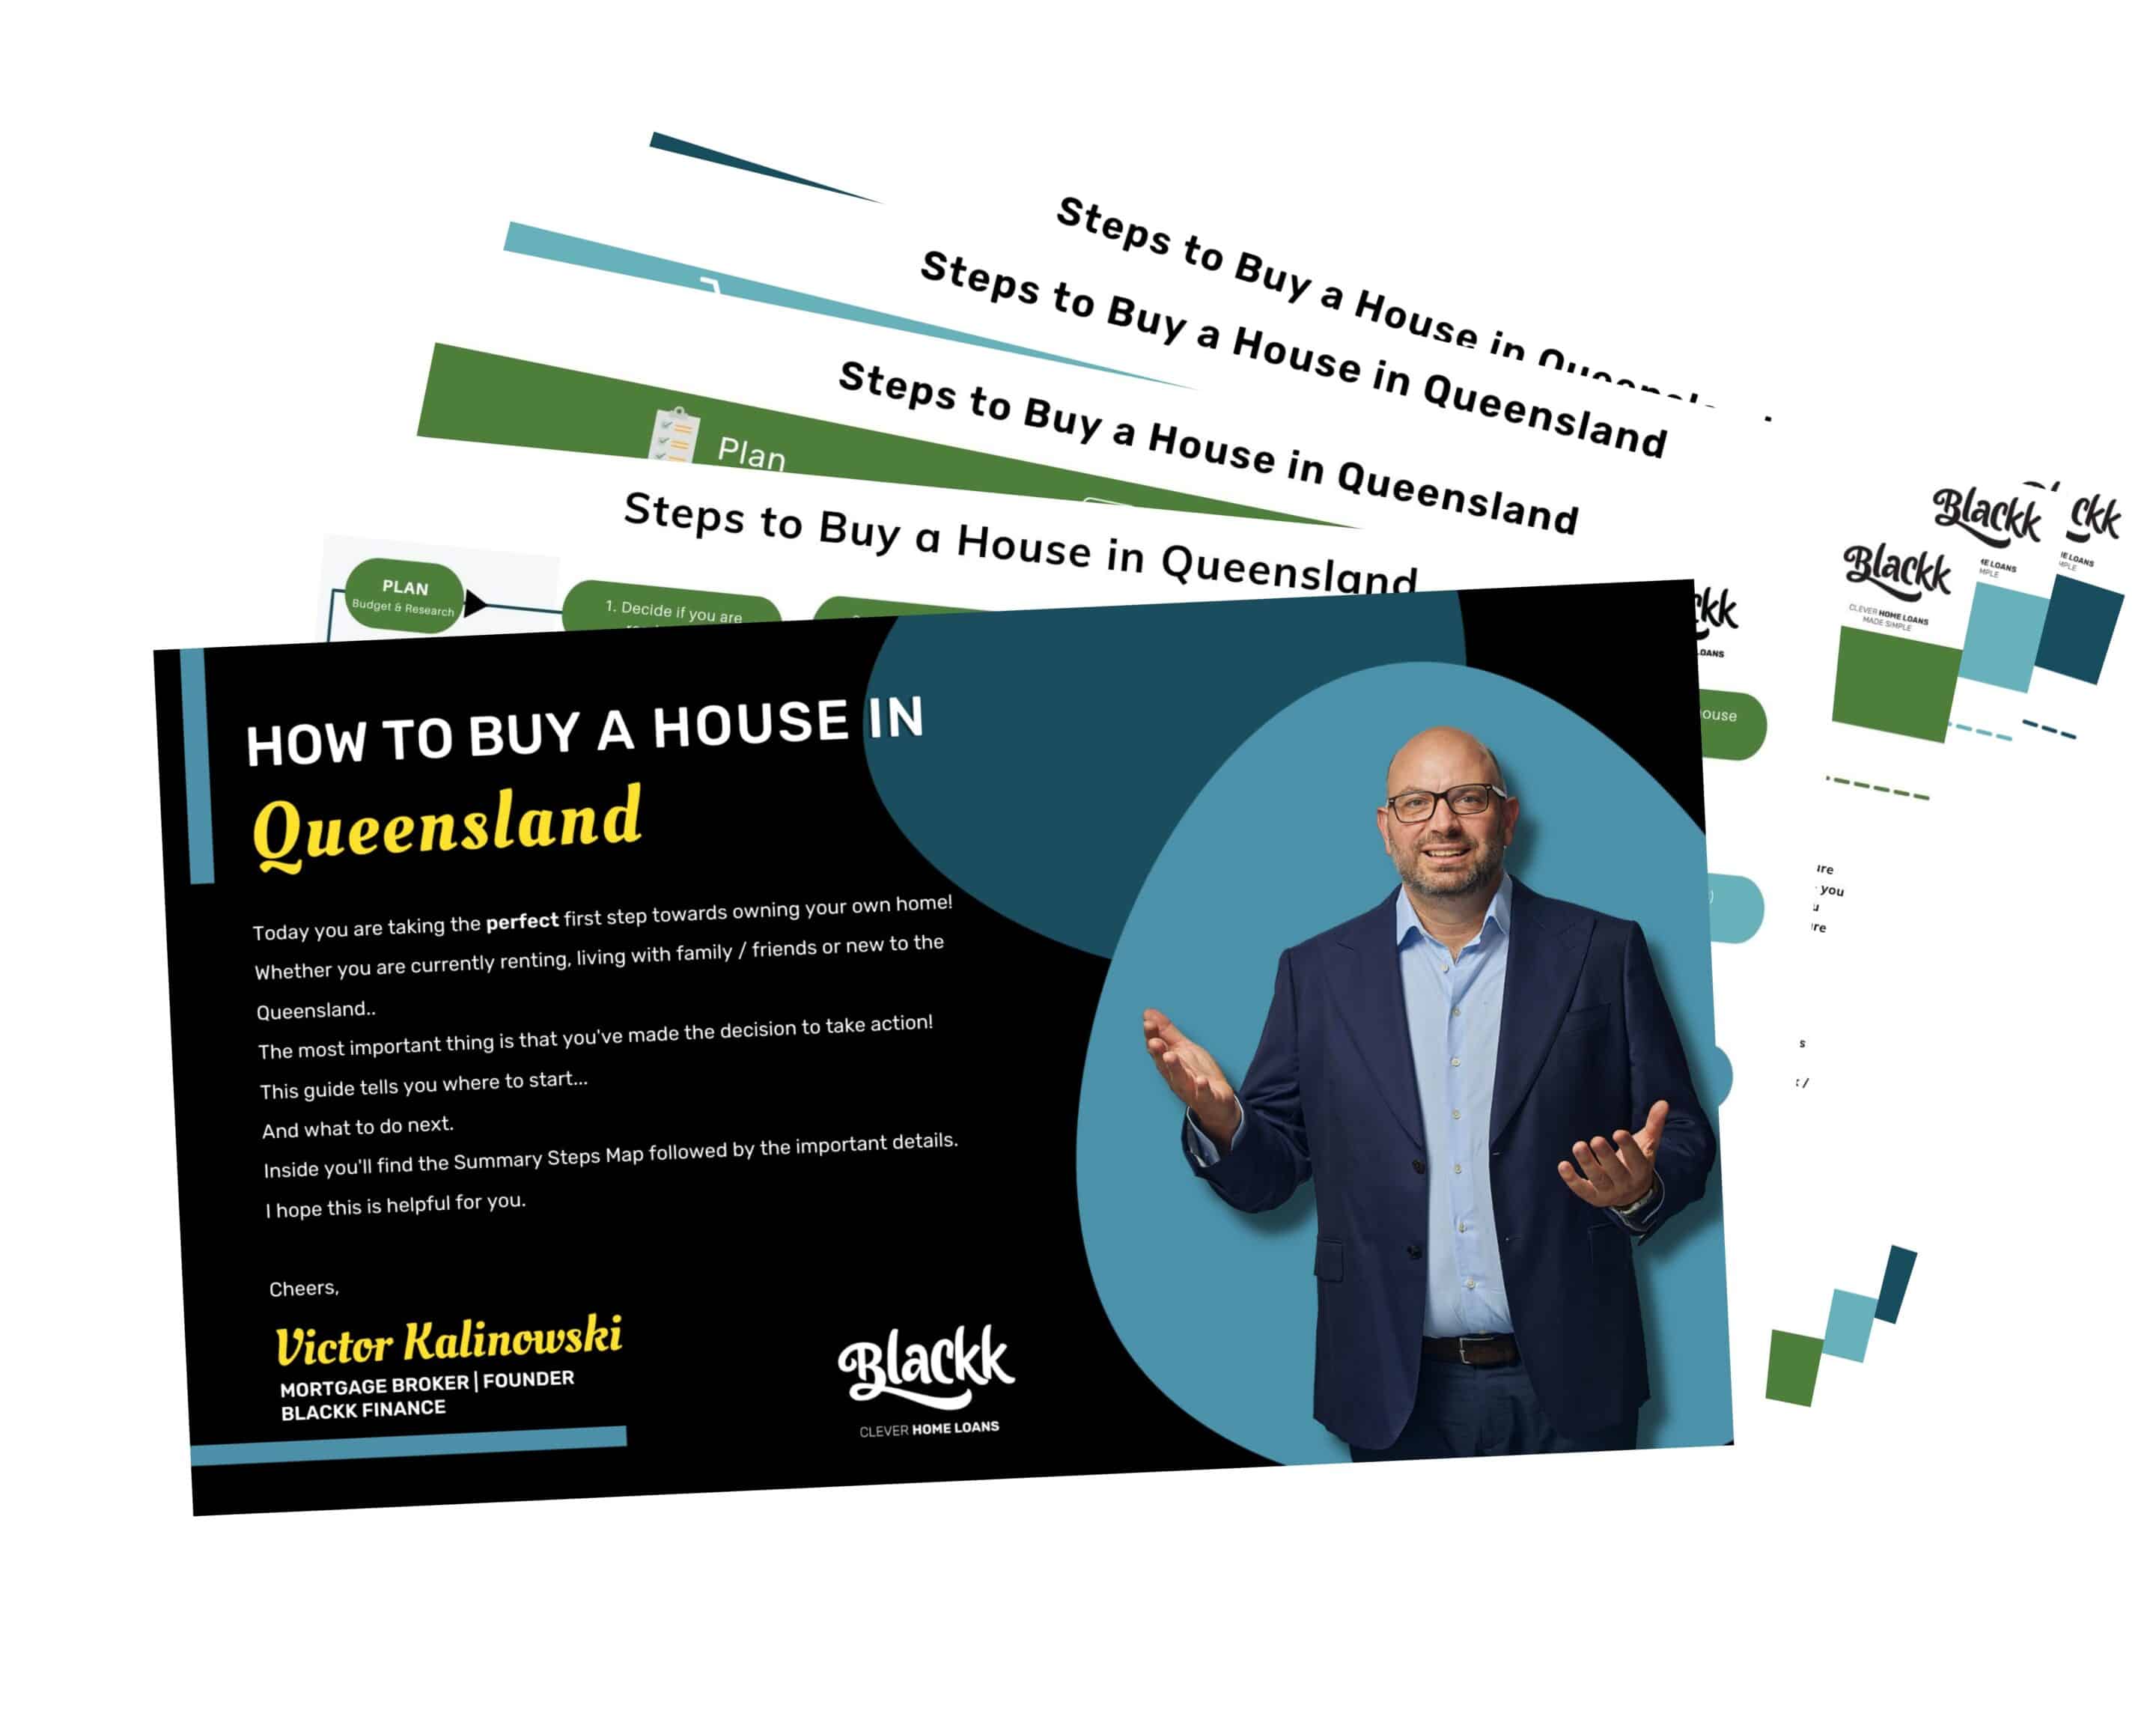 How to Buy a House in Queensland advice with Victor